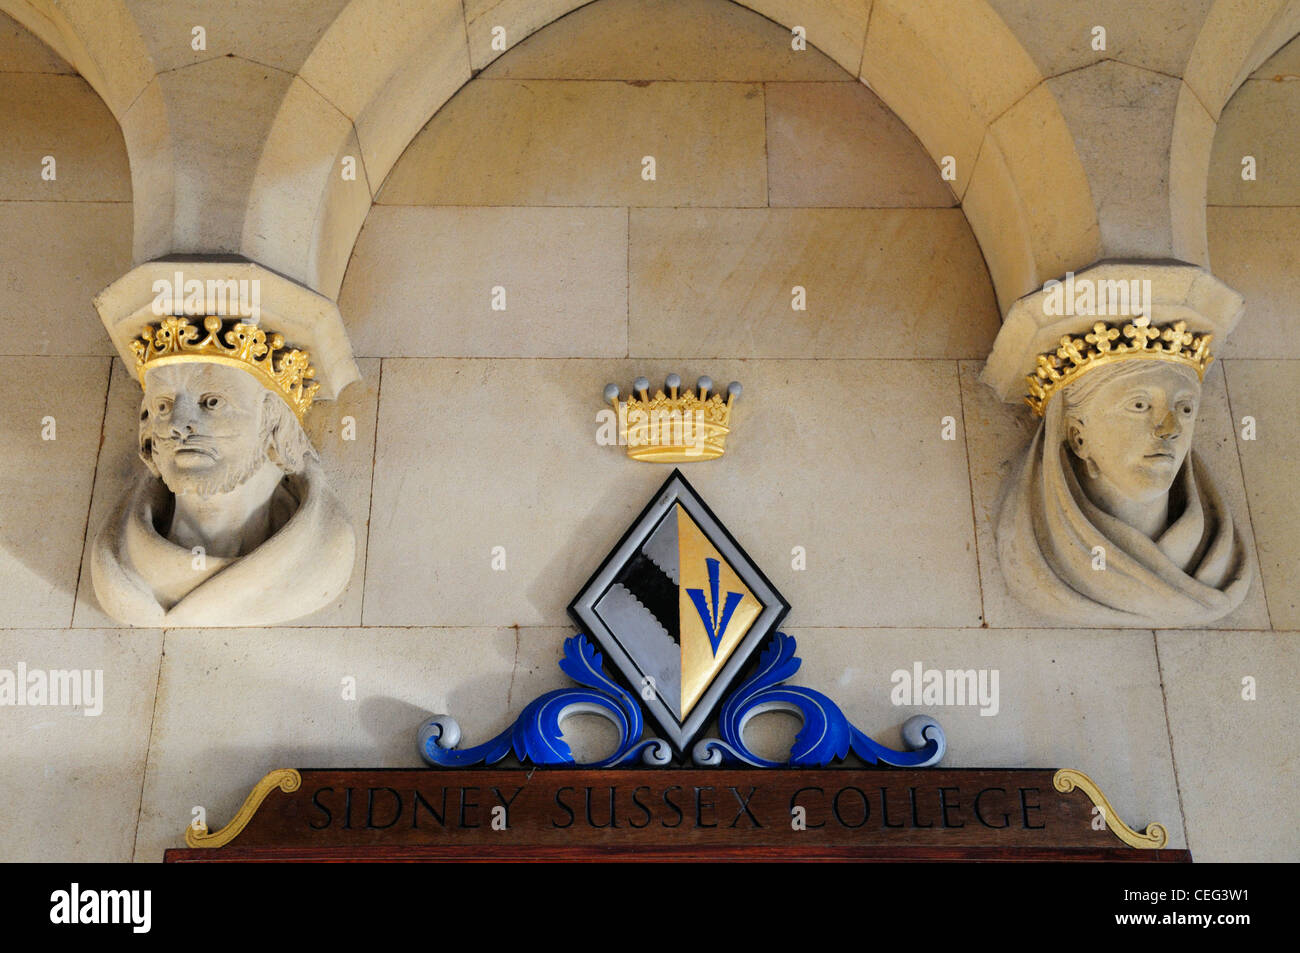 Coat of Arms and Carvings at the entrance to Sidney Sussex College, Cambridge, England, UK Stock Photo